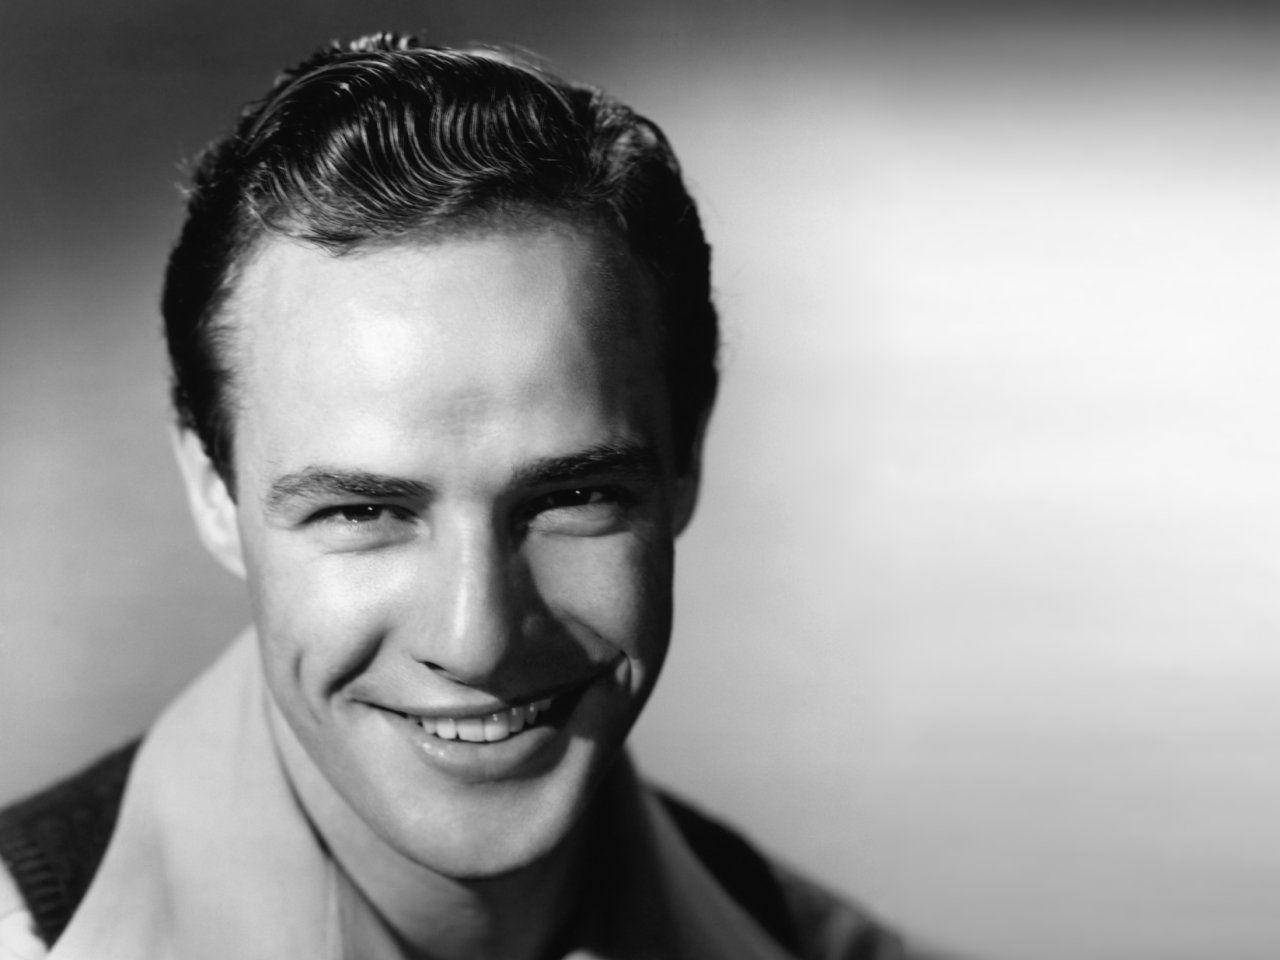 Marlon Brando Charming Smile With Dimples Background